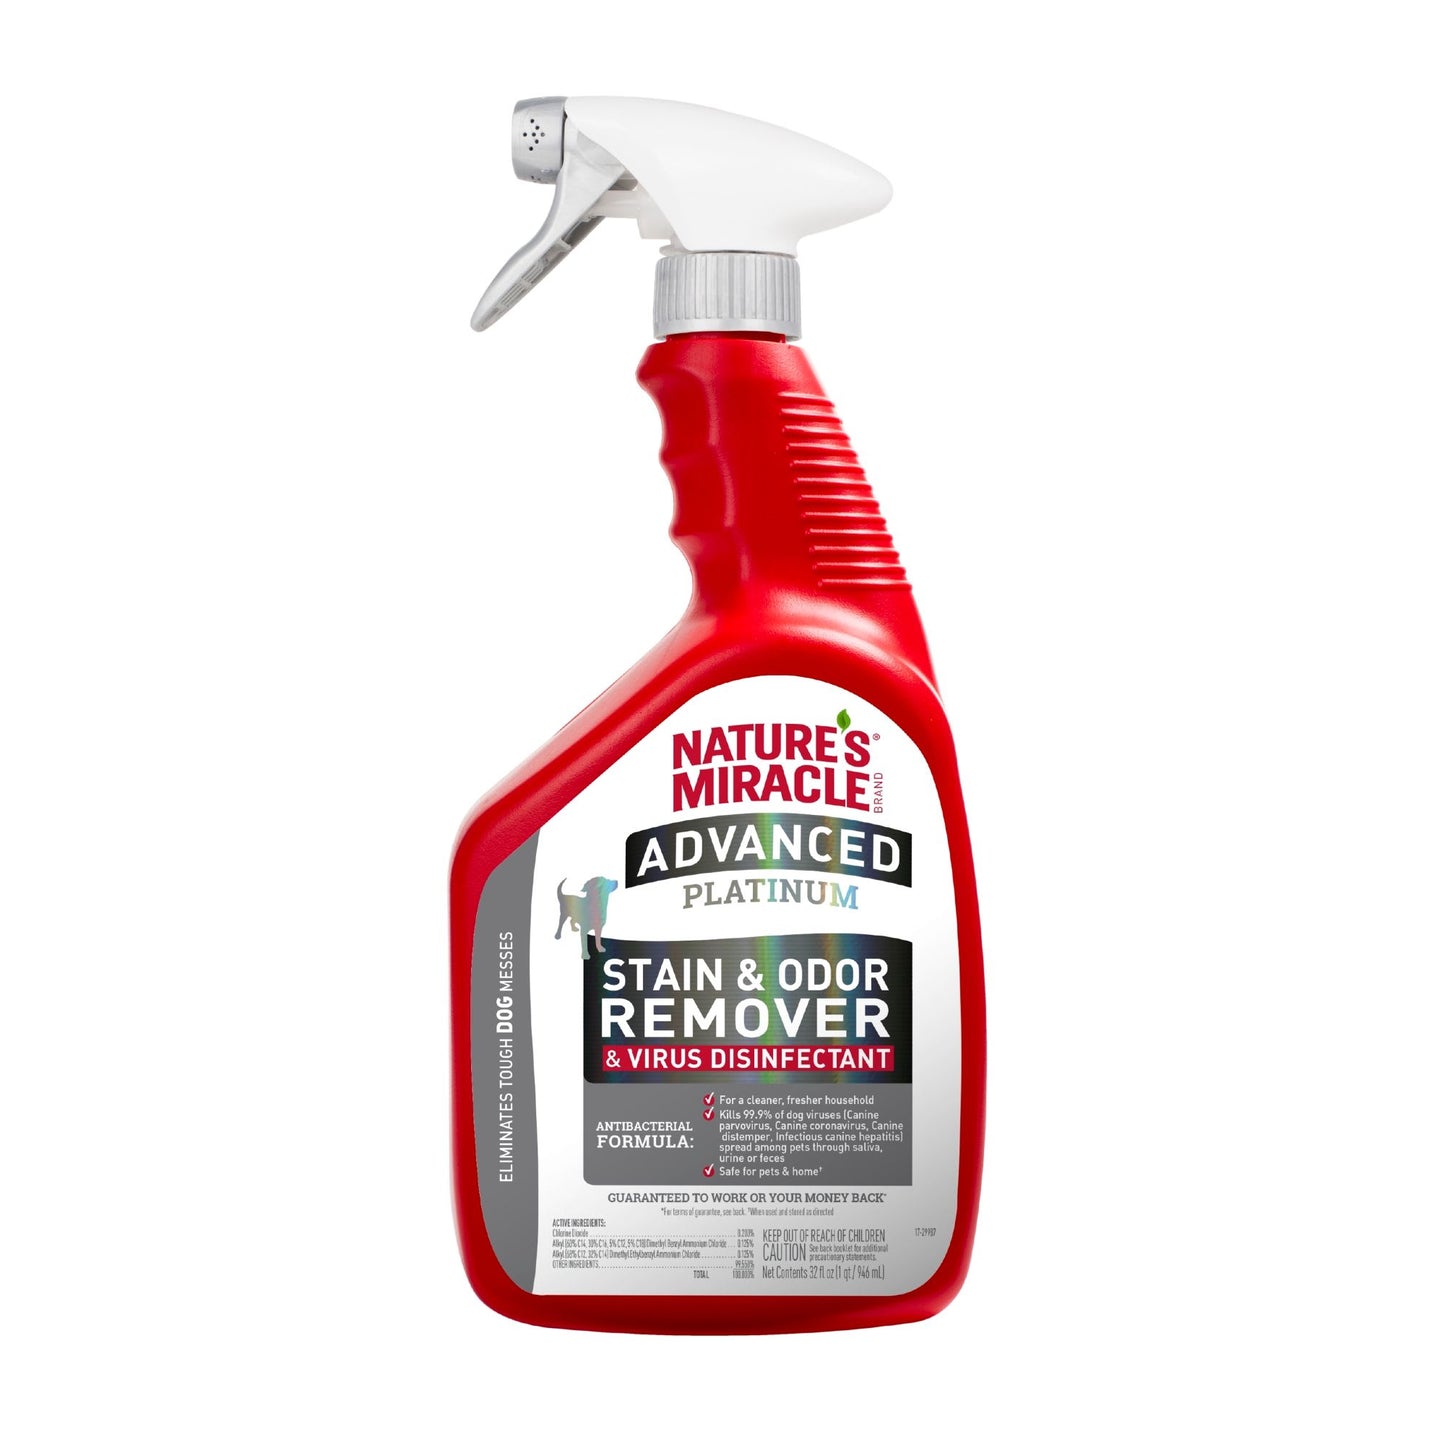 Nature's Miracle Advanced Platinum Disinfectant Stain & Odor Remover (DOG) 32 oz